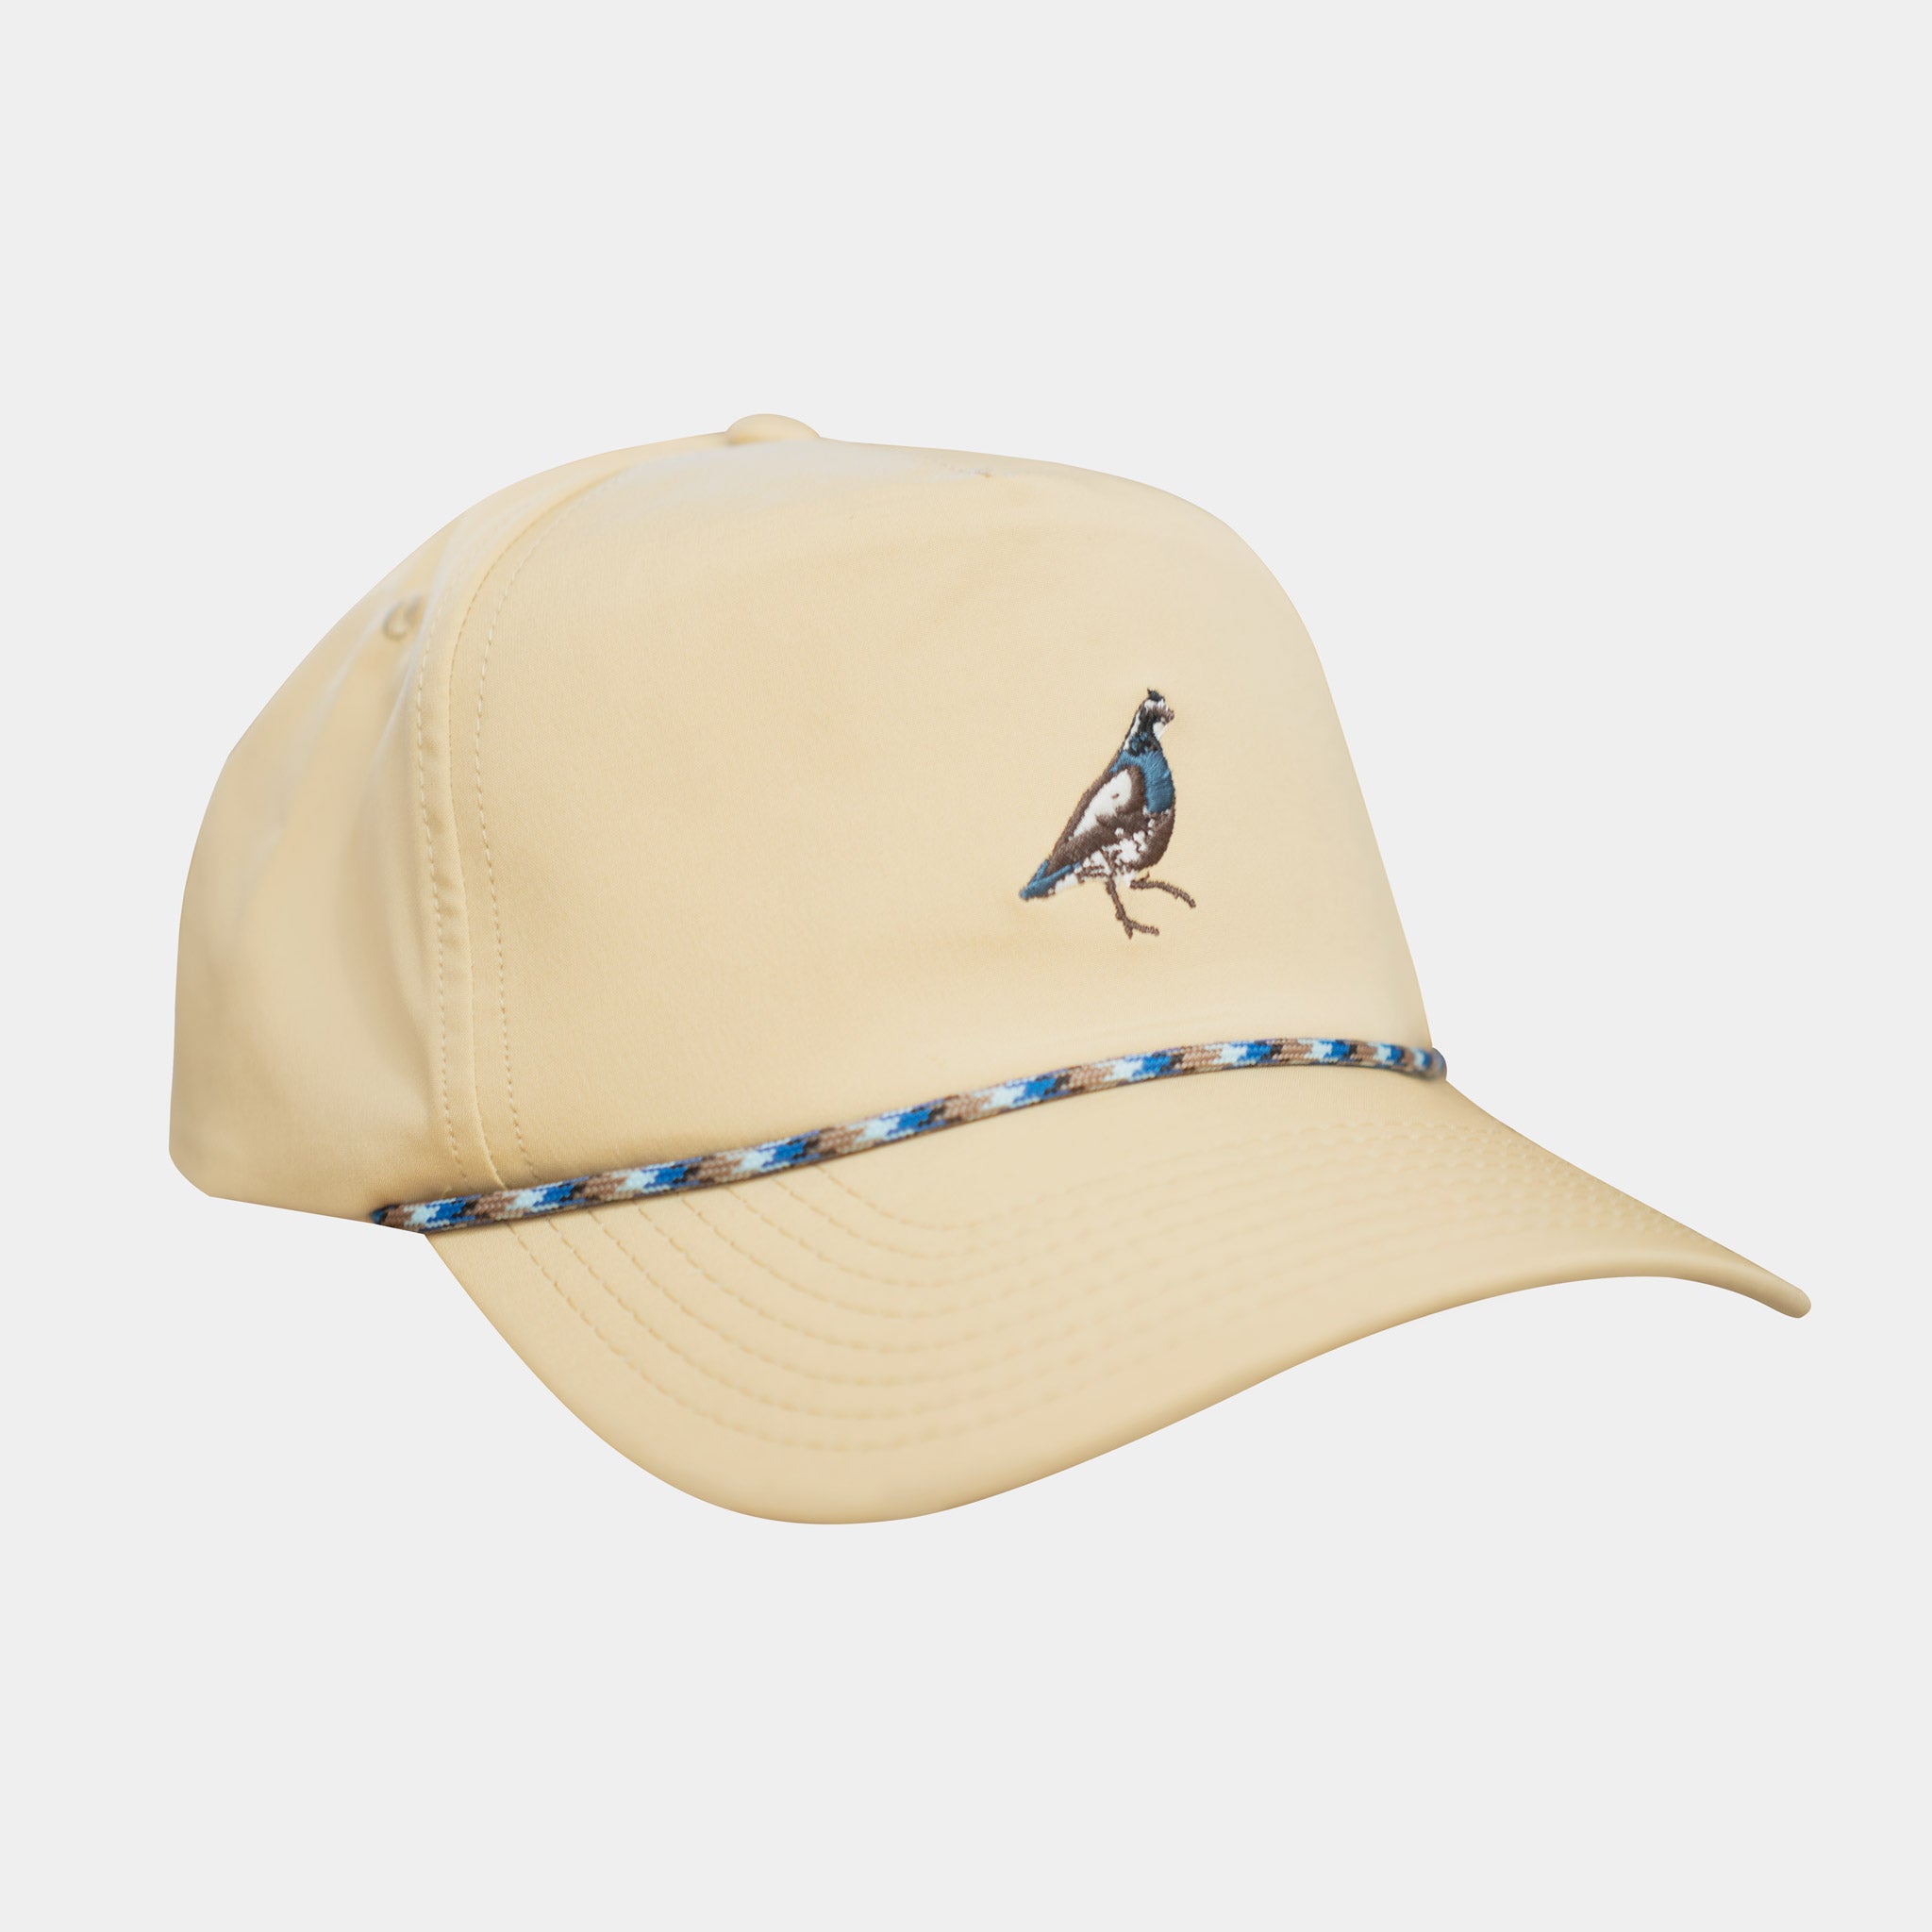 product pic of snapback rope hat with quail embroidery design